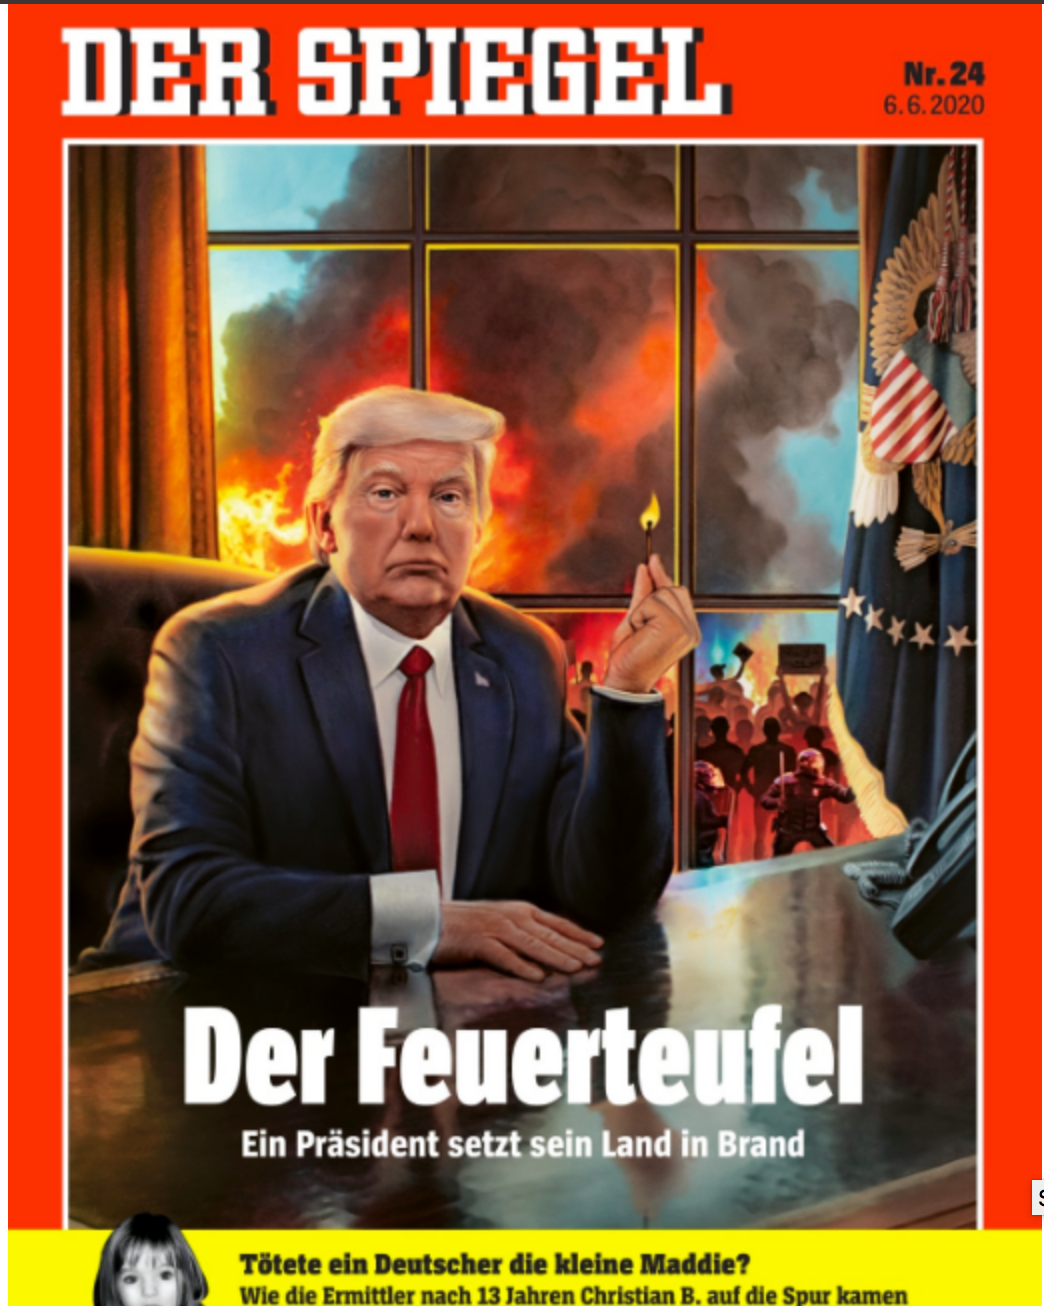 The Fire Devil: A President Sets His Country on Fire.